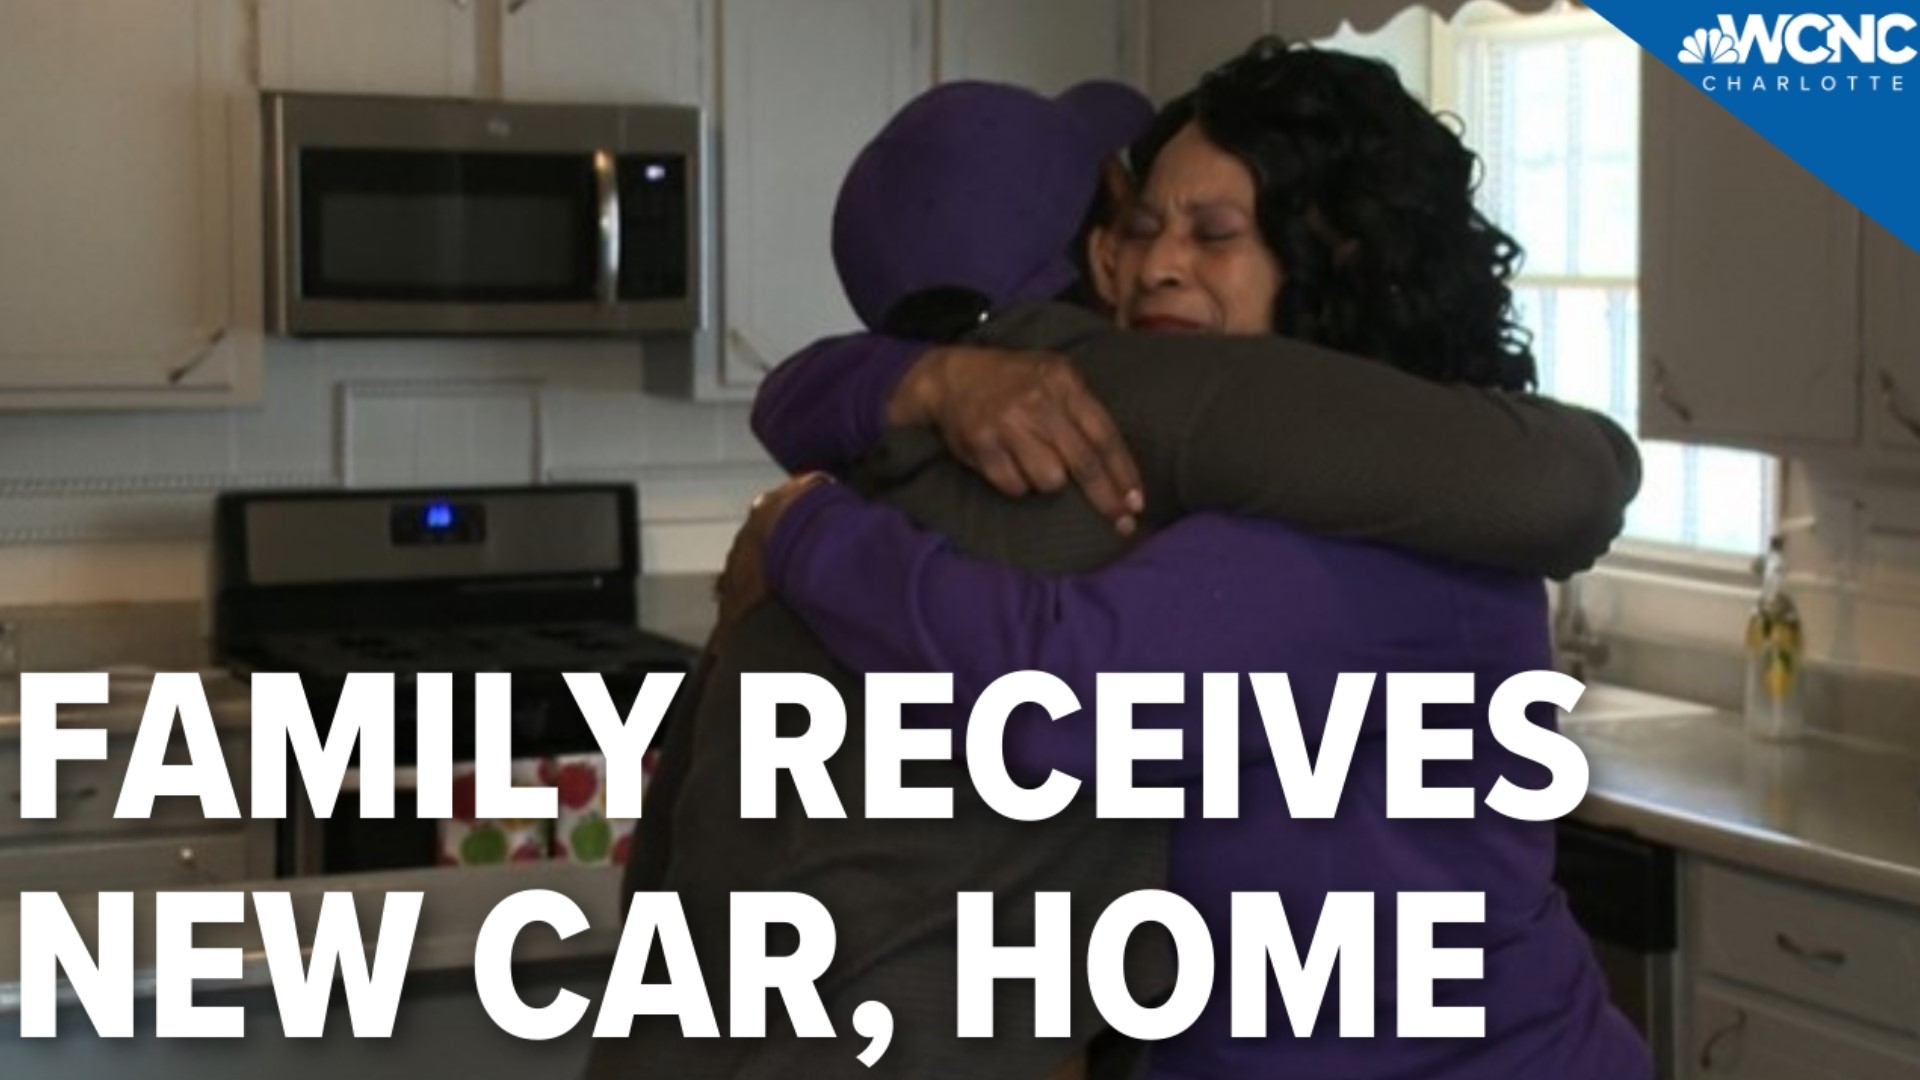 Charlotte nonprofit Gracious Hands surprised a single mother and her two daughters Thursday with a new home and car.